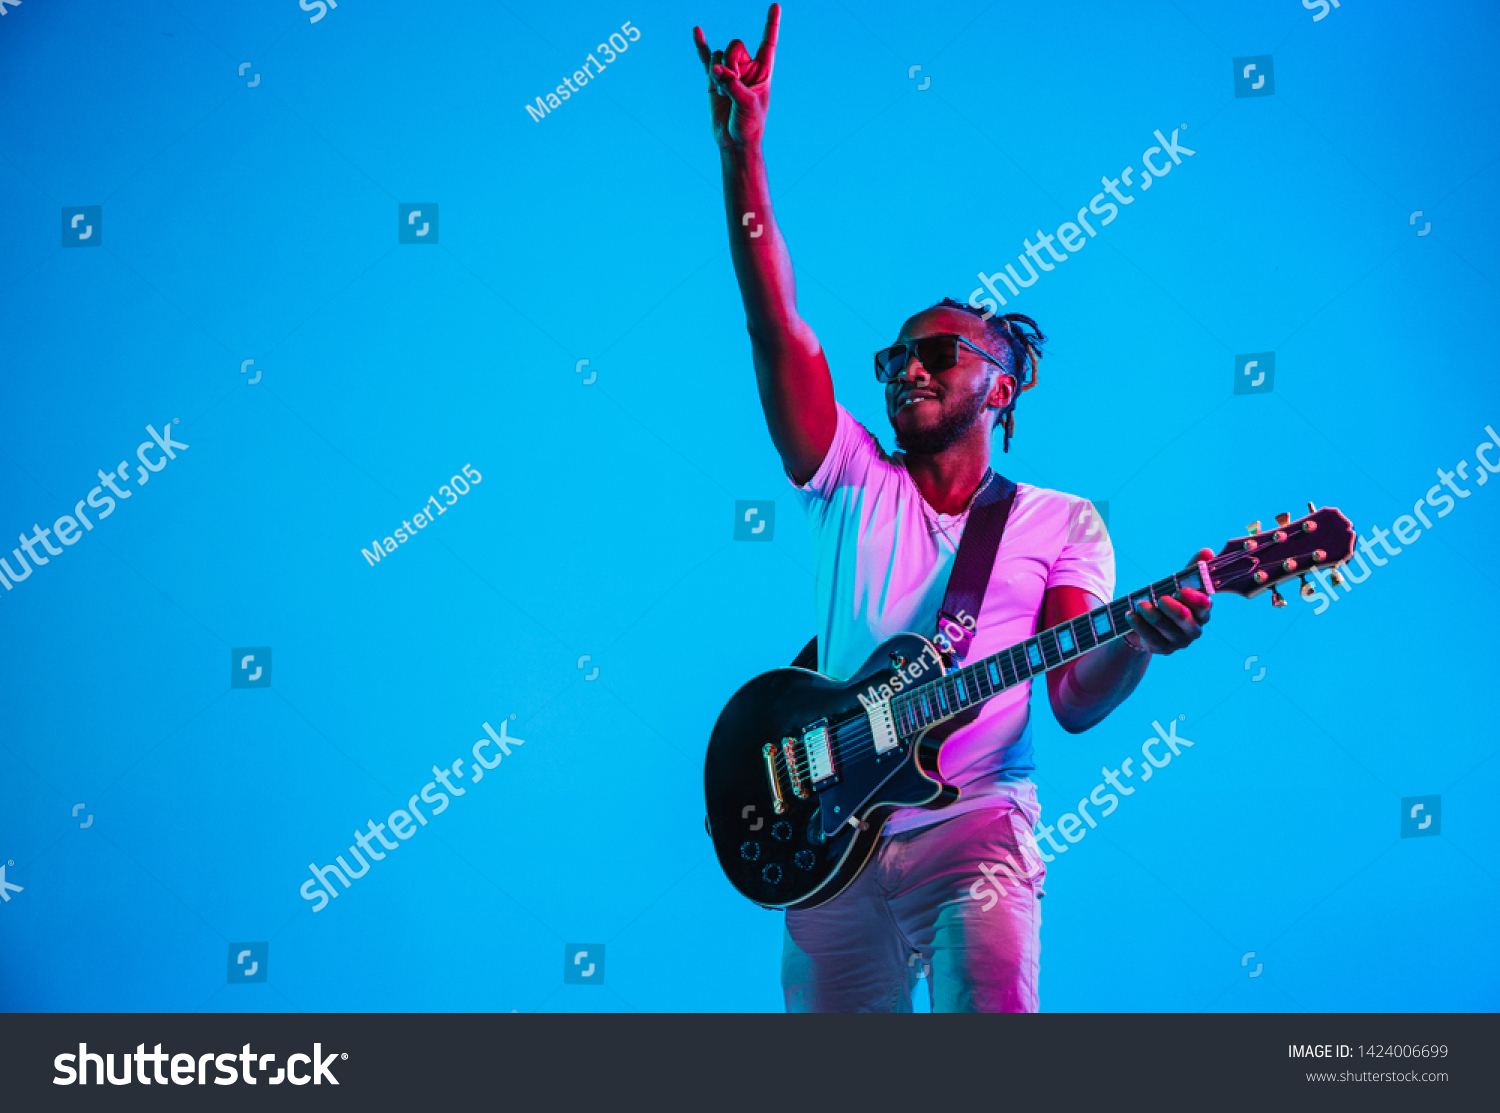 Young african-american musician playing the guitar like a rockstar on blue studio background in neon light. Concept of music, hobby. Joyful attractive guy improvising. Retro colorful portrait. #1424006699